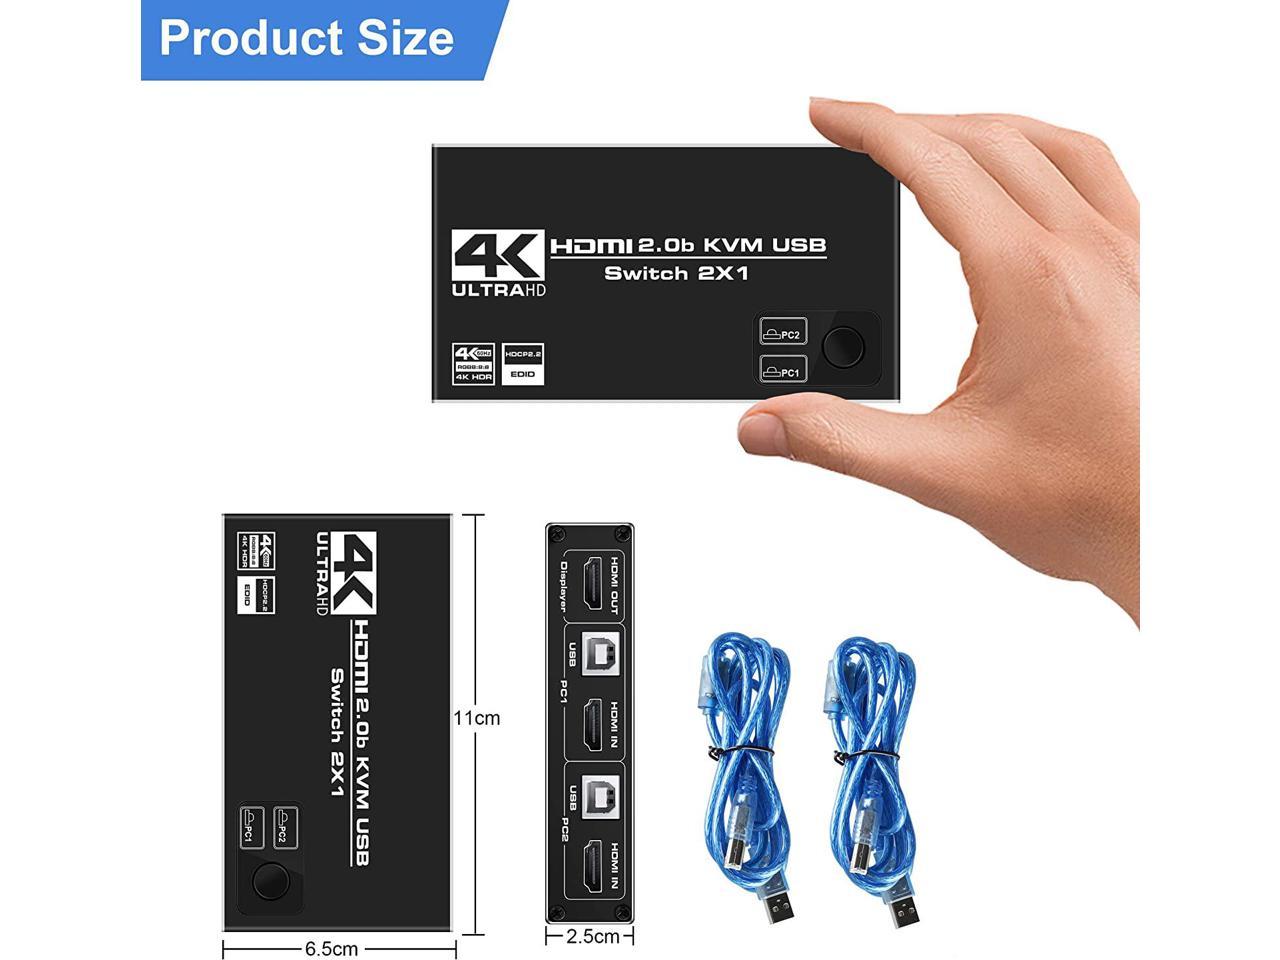 HF-HKU212: HDMI KVM Switch, 4K@60Hz USB Switch 2x1 HDMI2.0 Ports + 3X USB KVM Ports, Share 2 Computers to one Monitor, Support Wireless Keyboard and Mouse, USB Disk, Printer, USB Camera - Click Image to Close